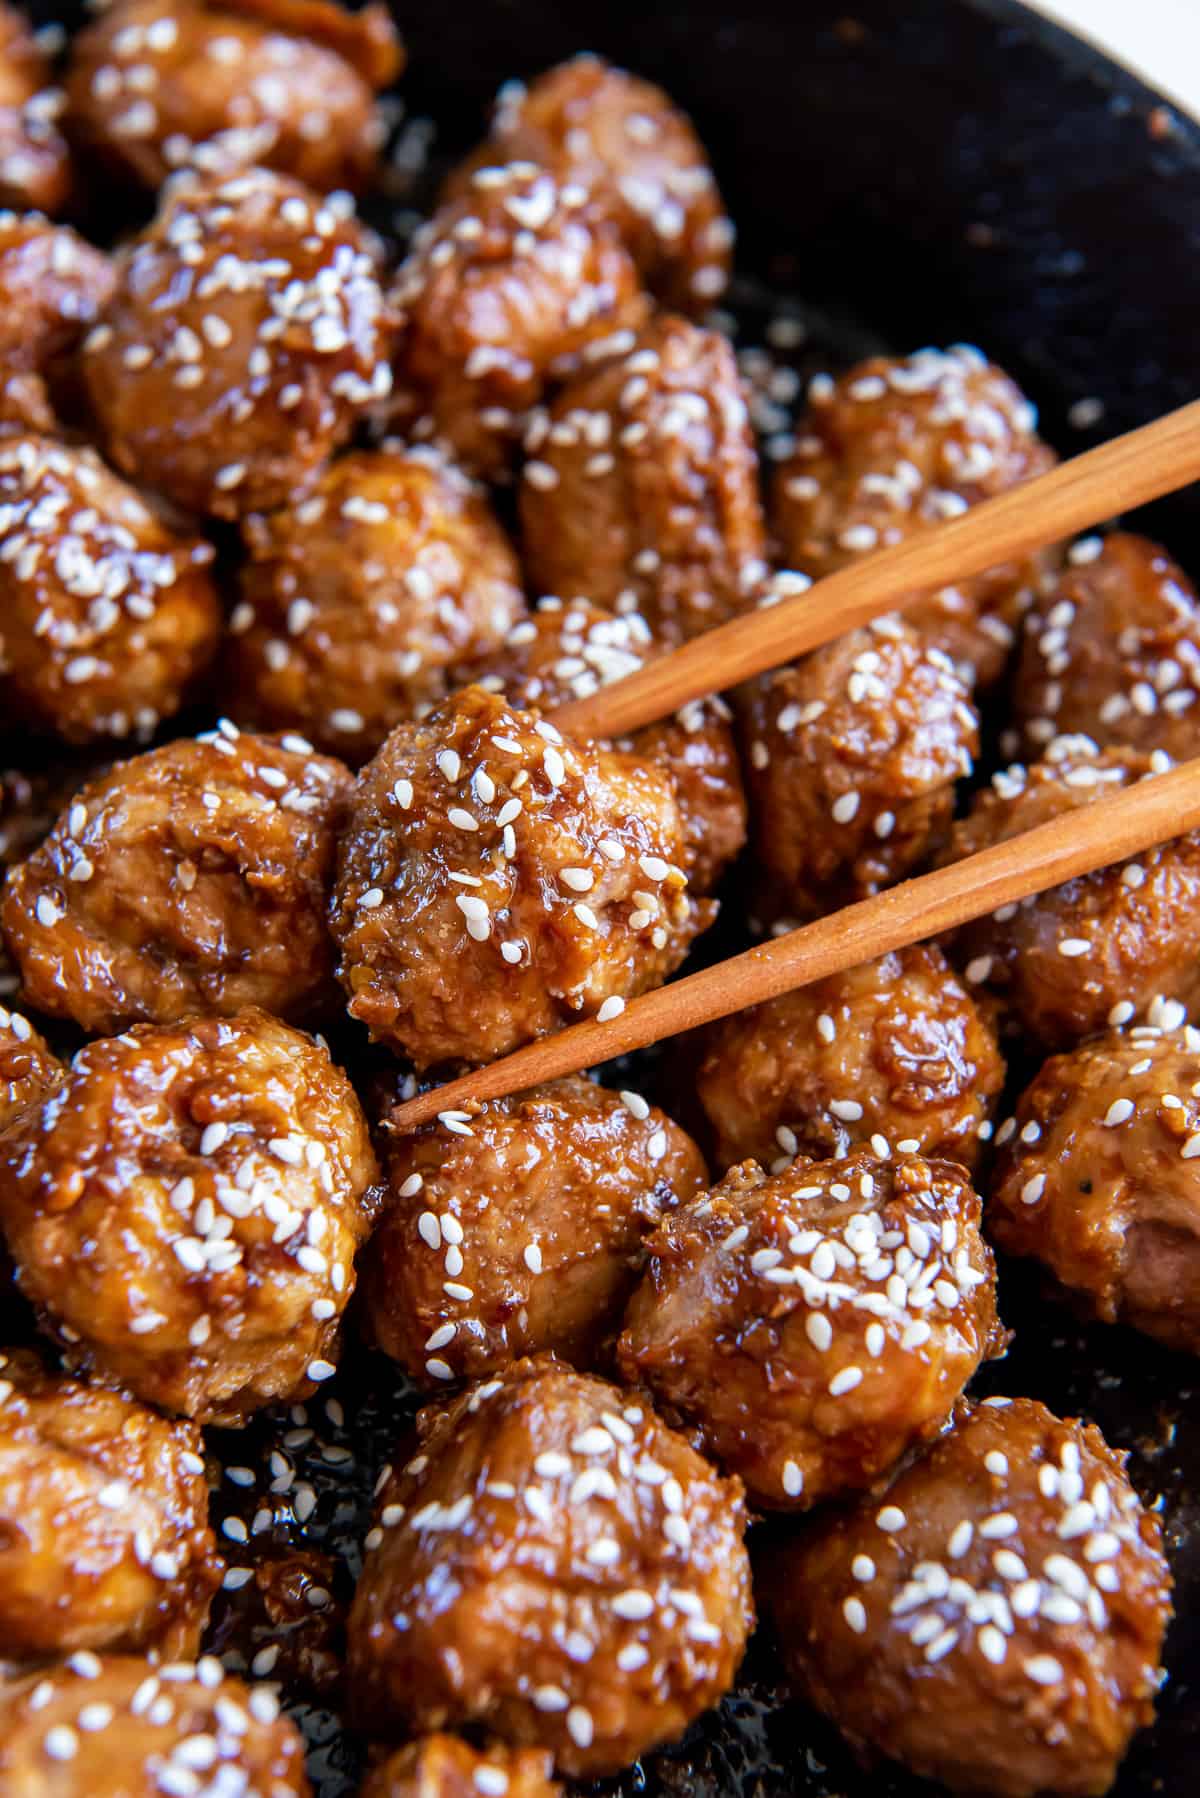 A closeup of chopsticks holding a meatball in a skillet.